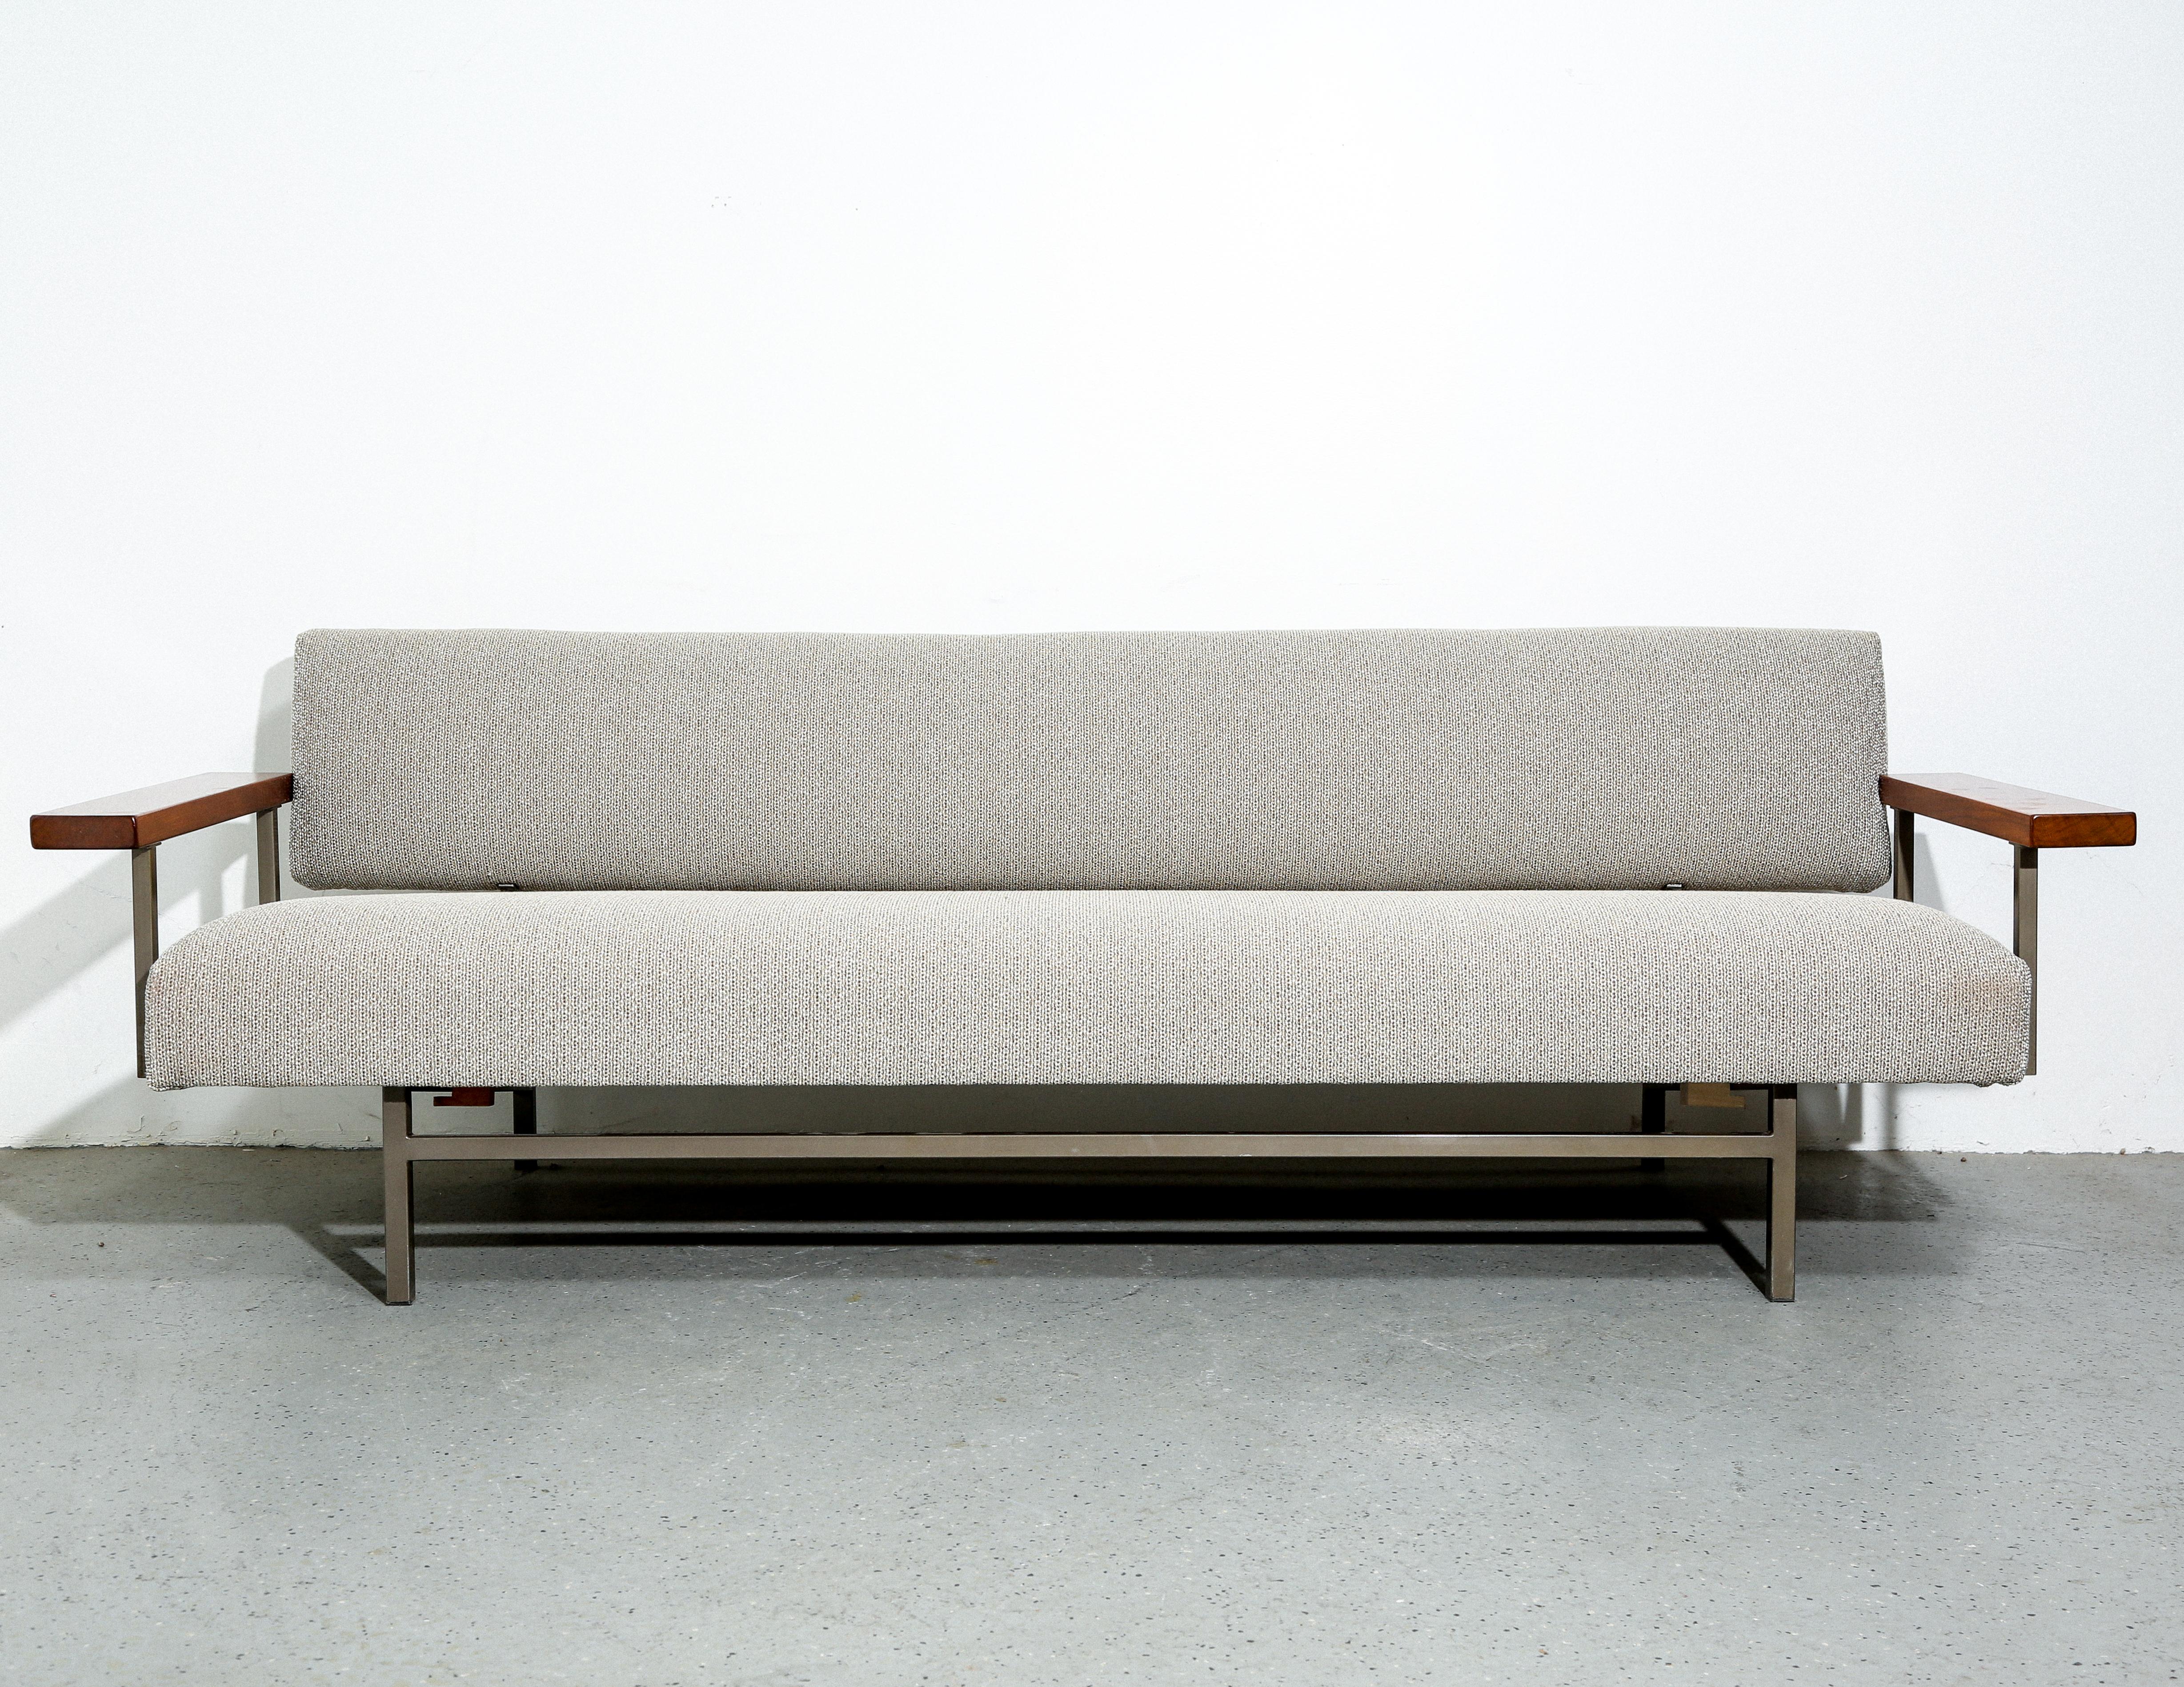 Metal “Lotus” Sofa/Daybed By Rob Parry For Gelderland For Sale